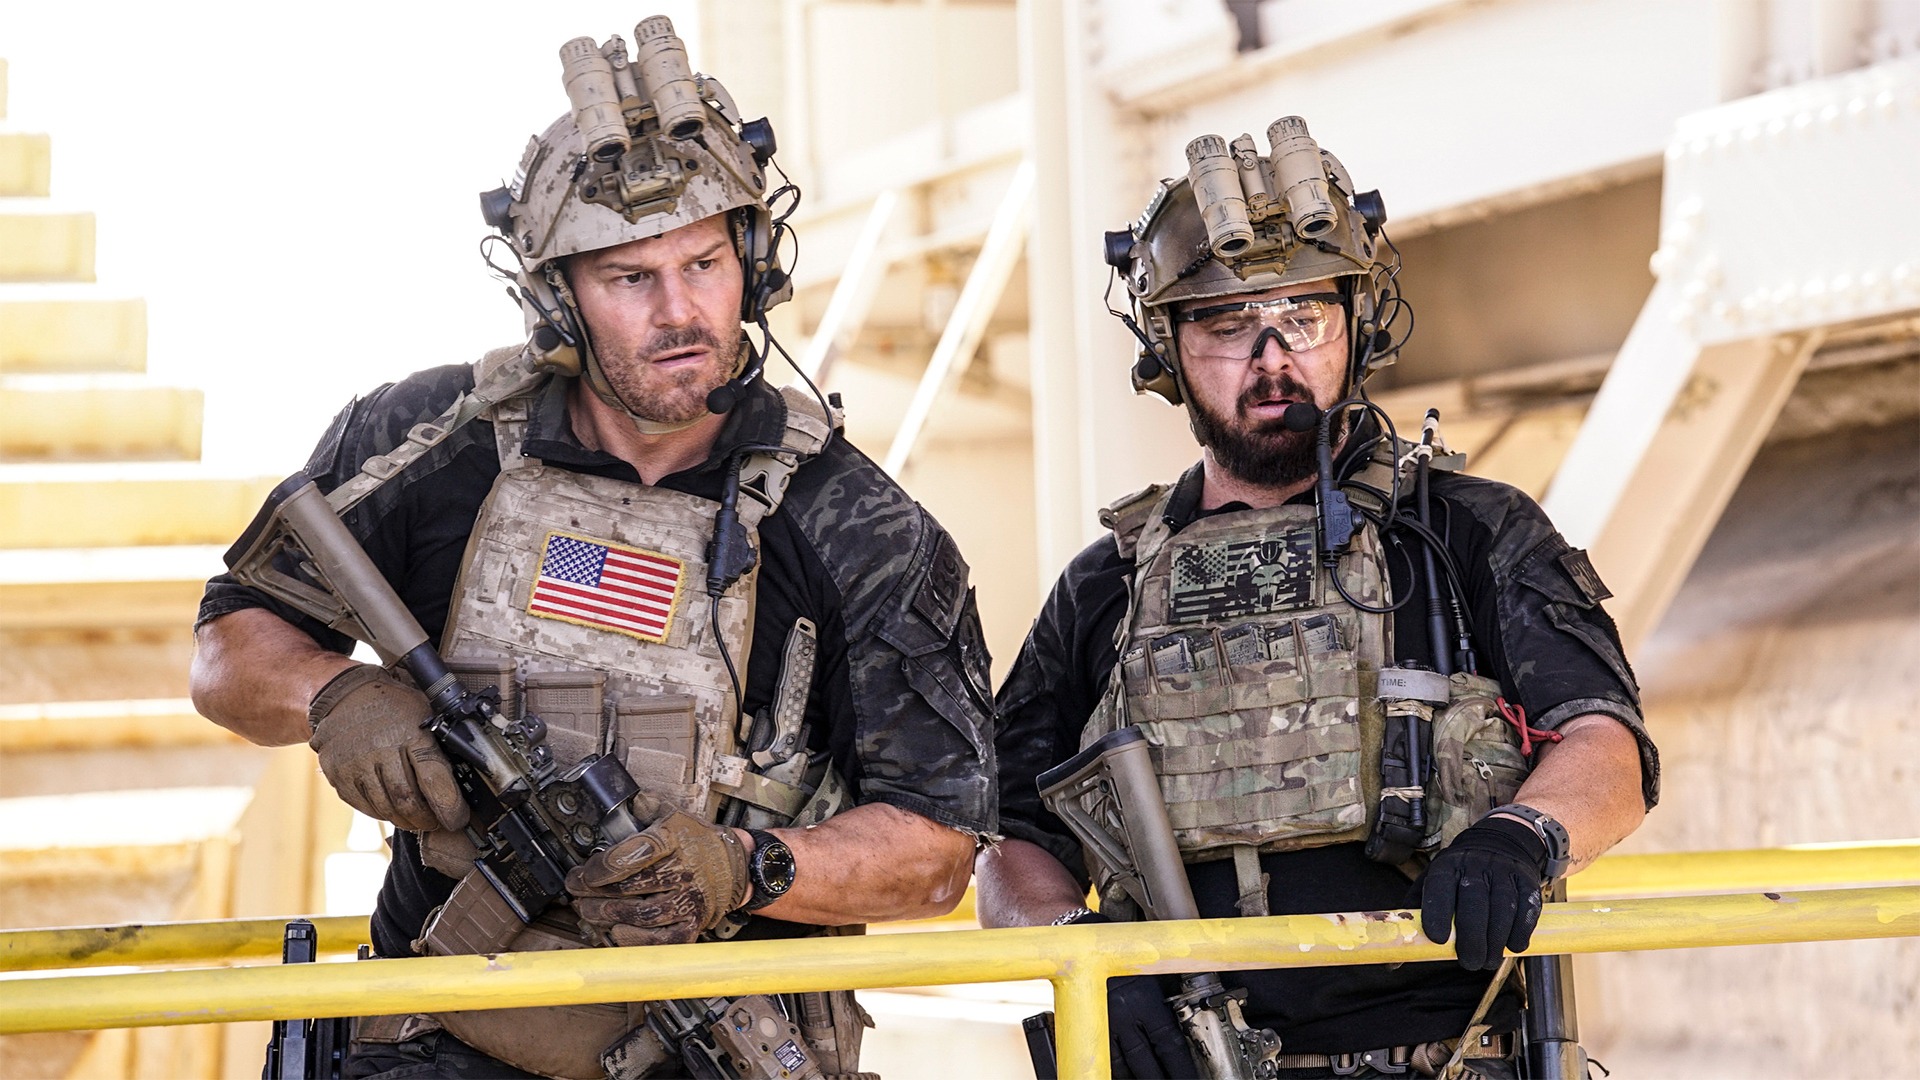 Watch SEAL Team Season 2 Episode 1 SEAL Team Fracture Full show on